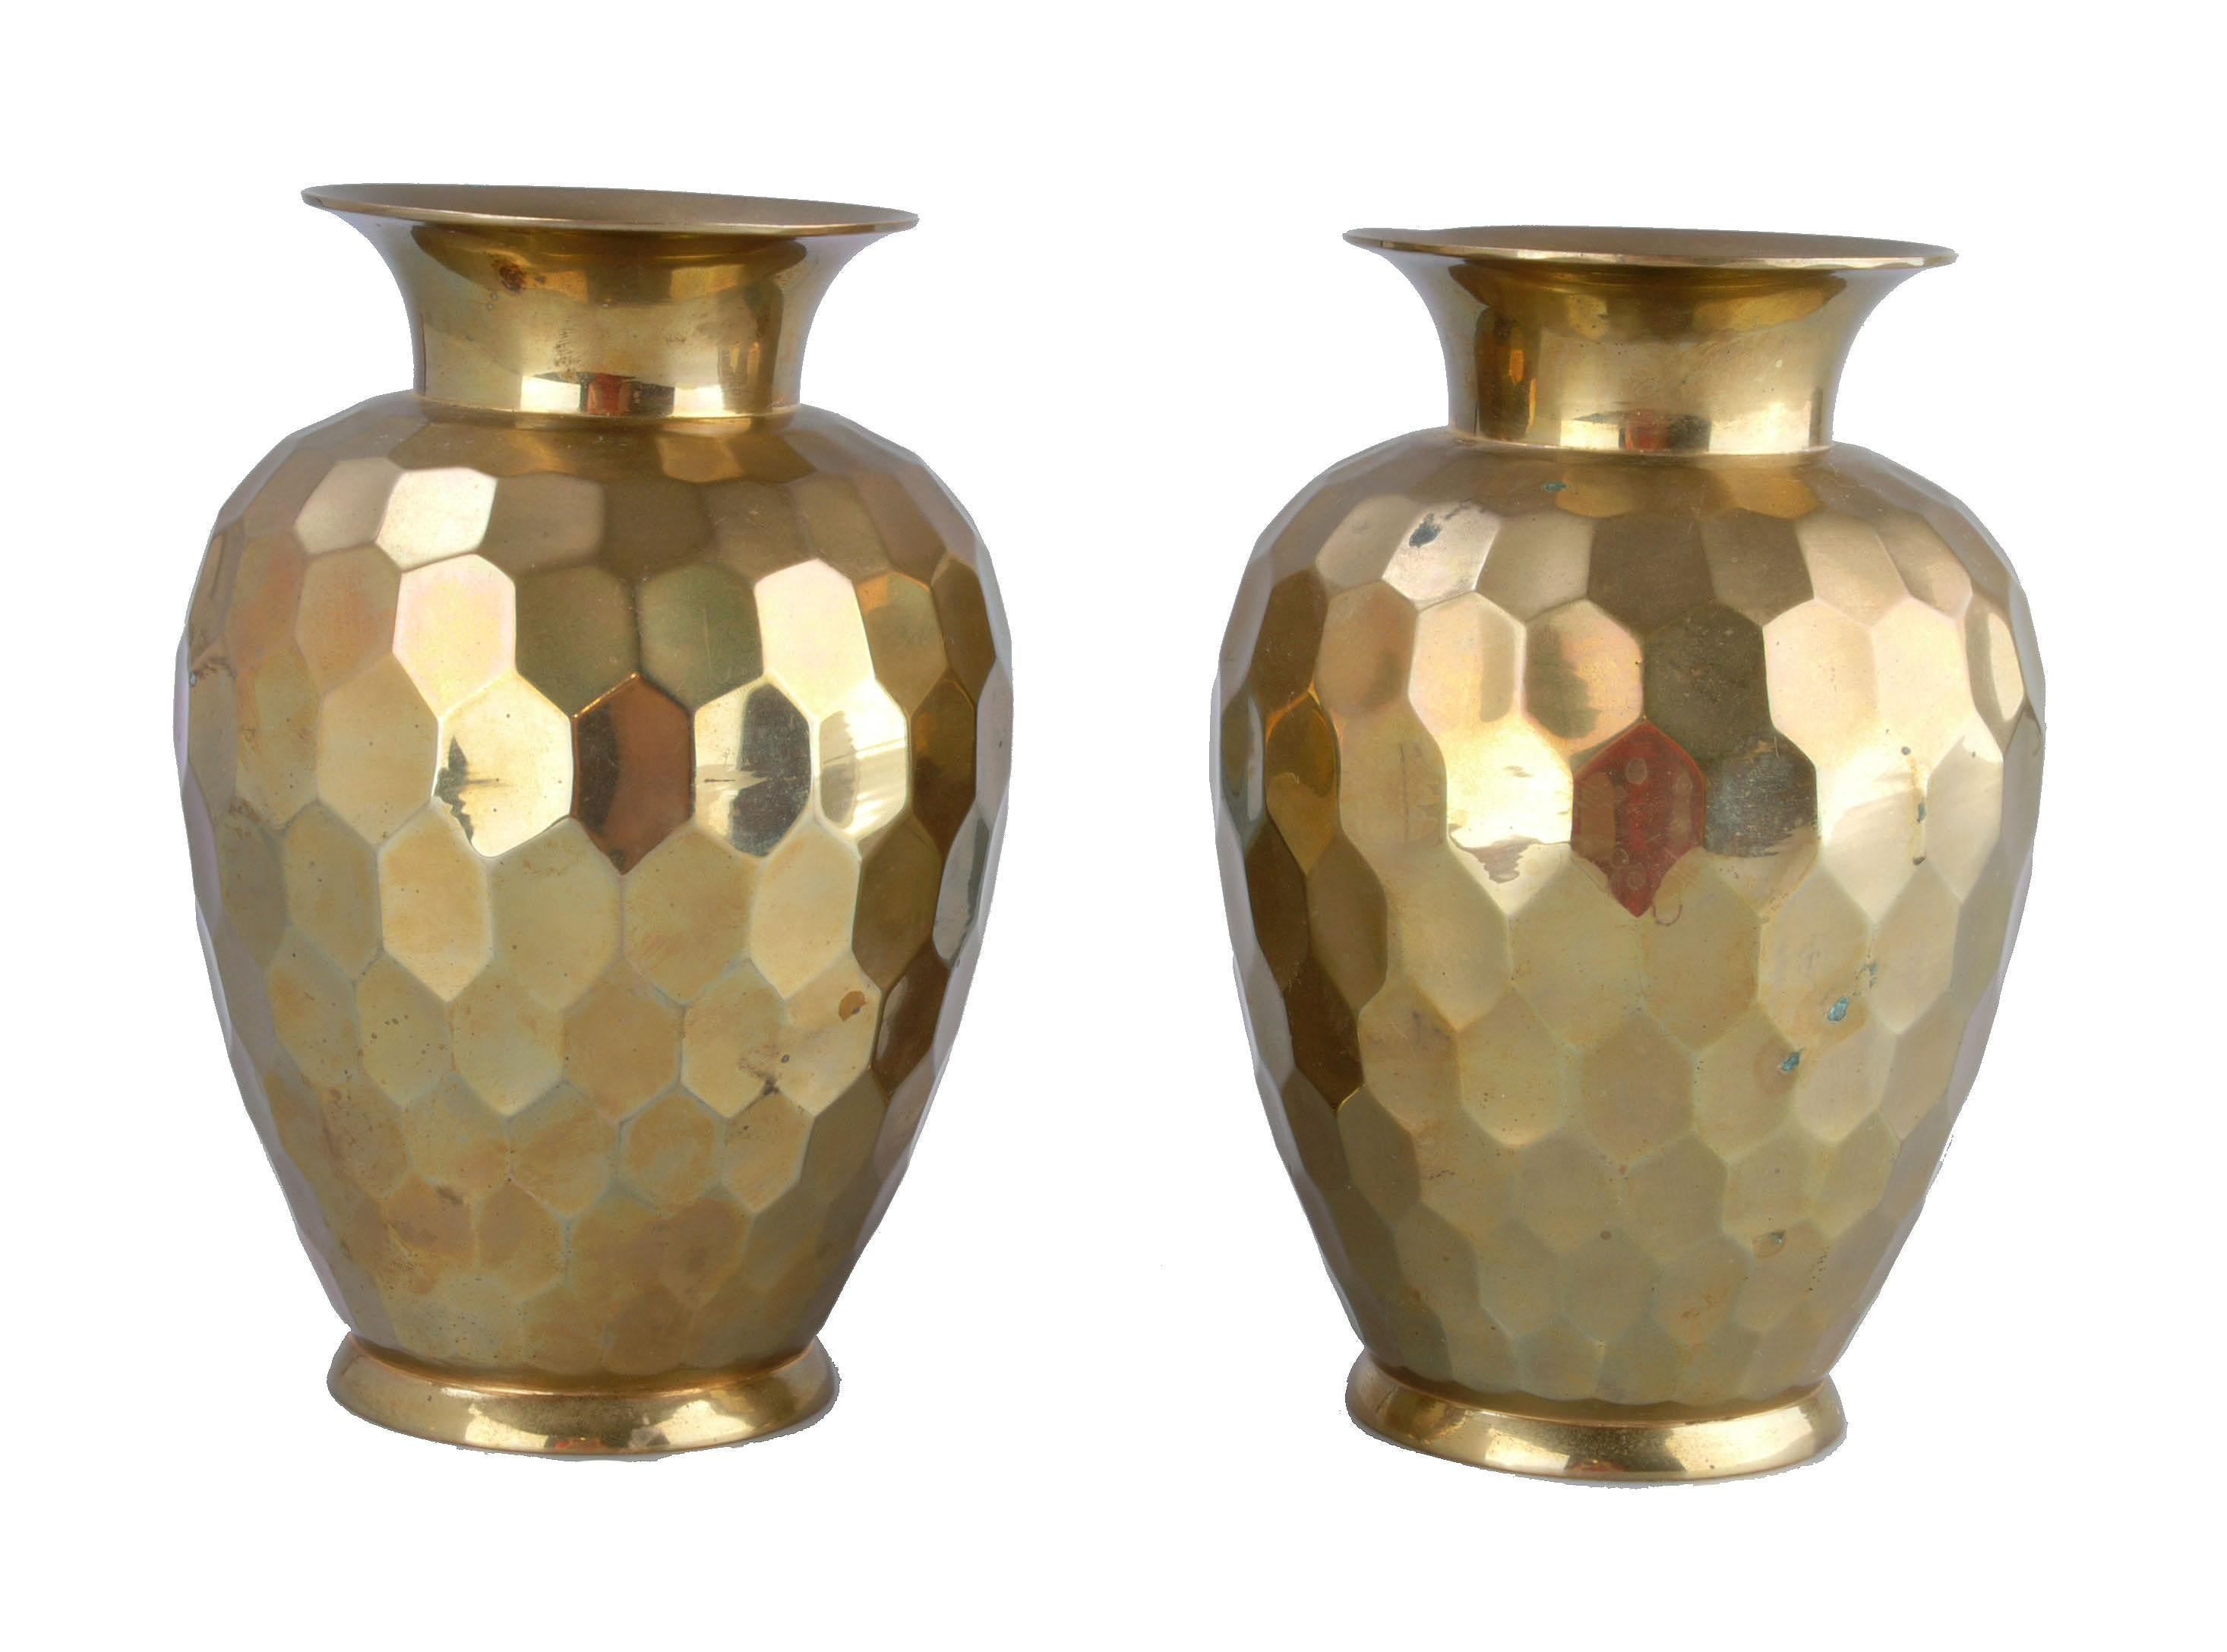 A pair of Hollywood Regency faceted decorative brass vases.
This set is wonderfully made and elegant in appearance.